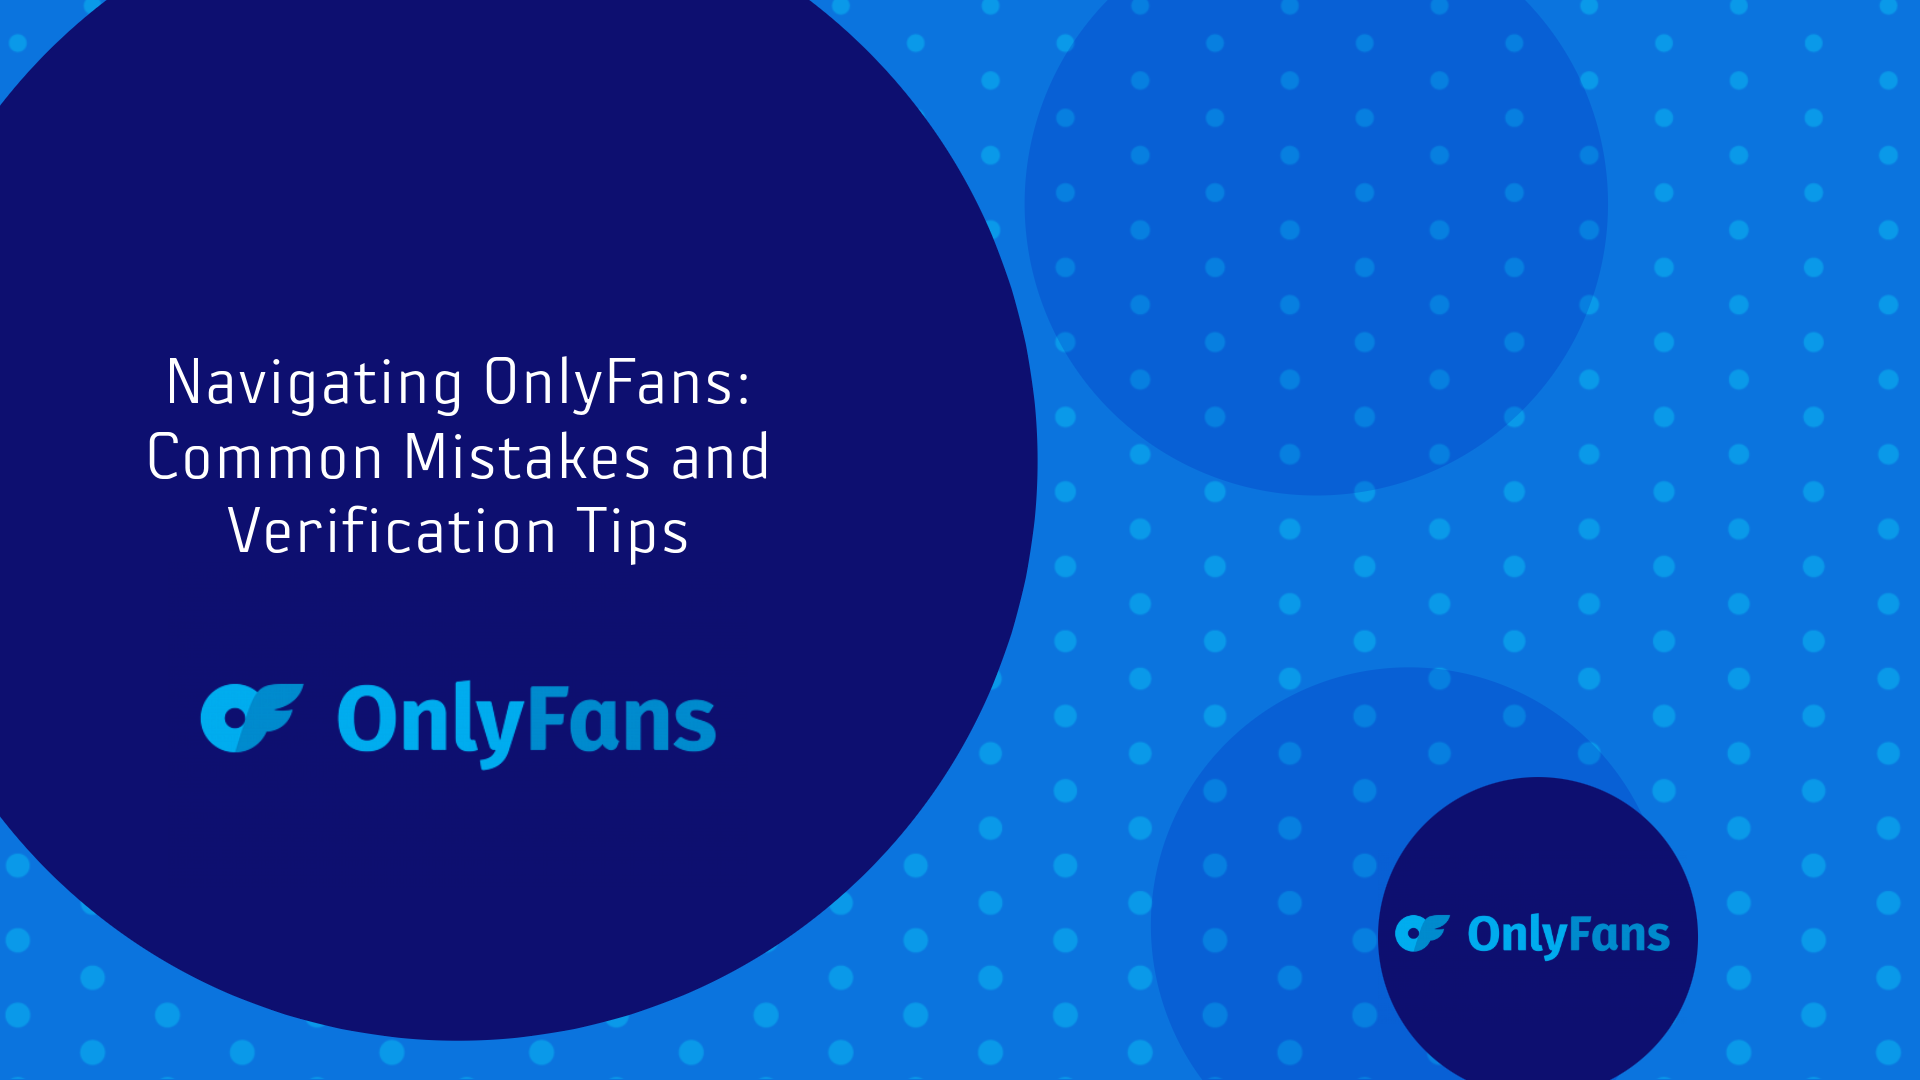 Navigating OnlyFans: Common Mistakes and Verification Tips